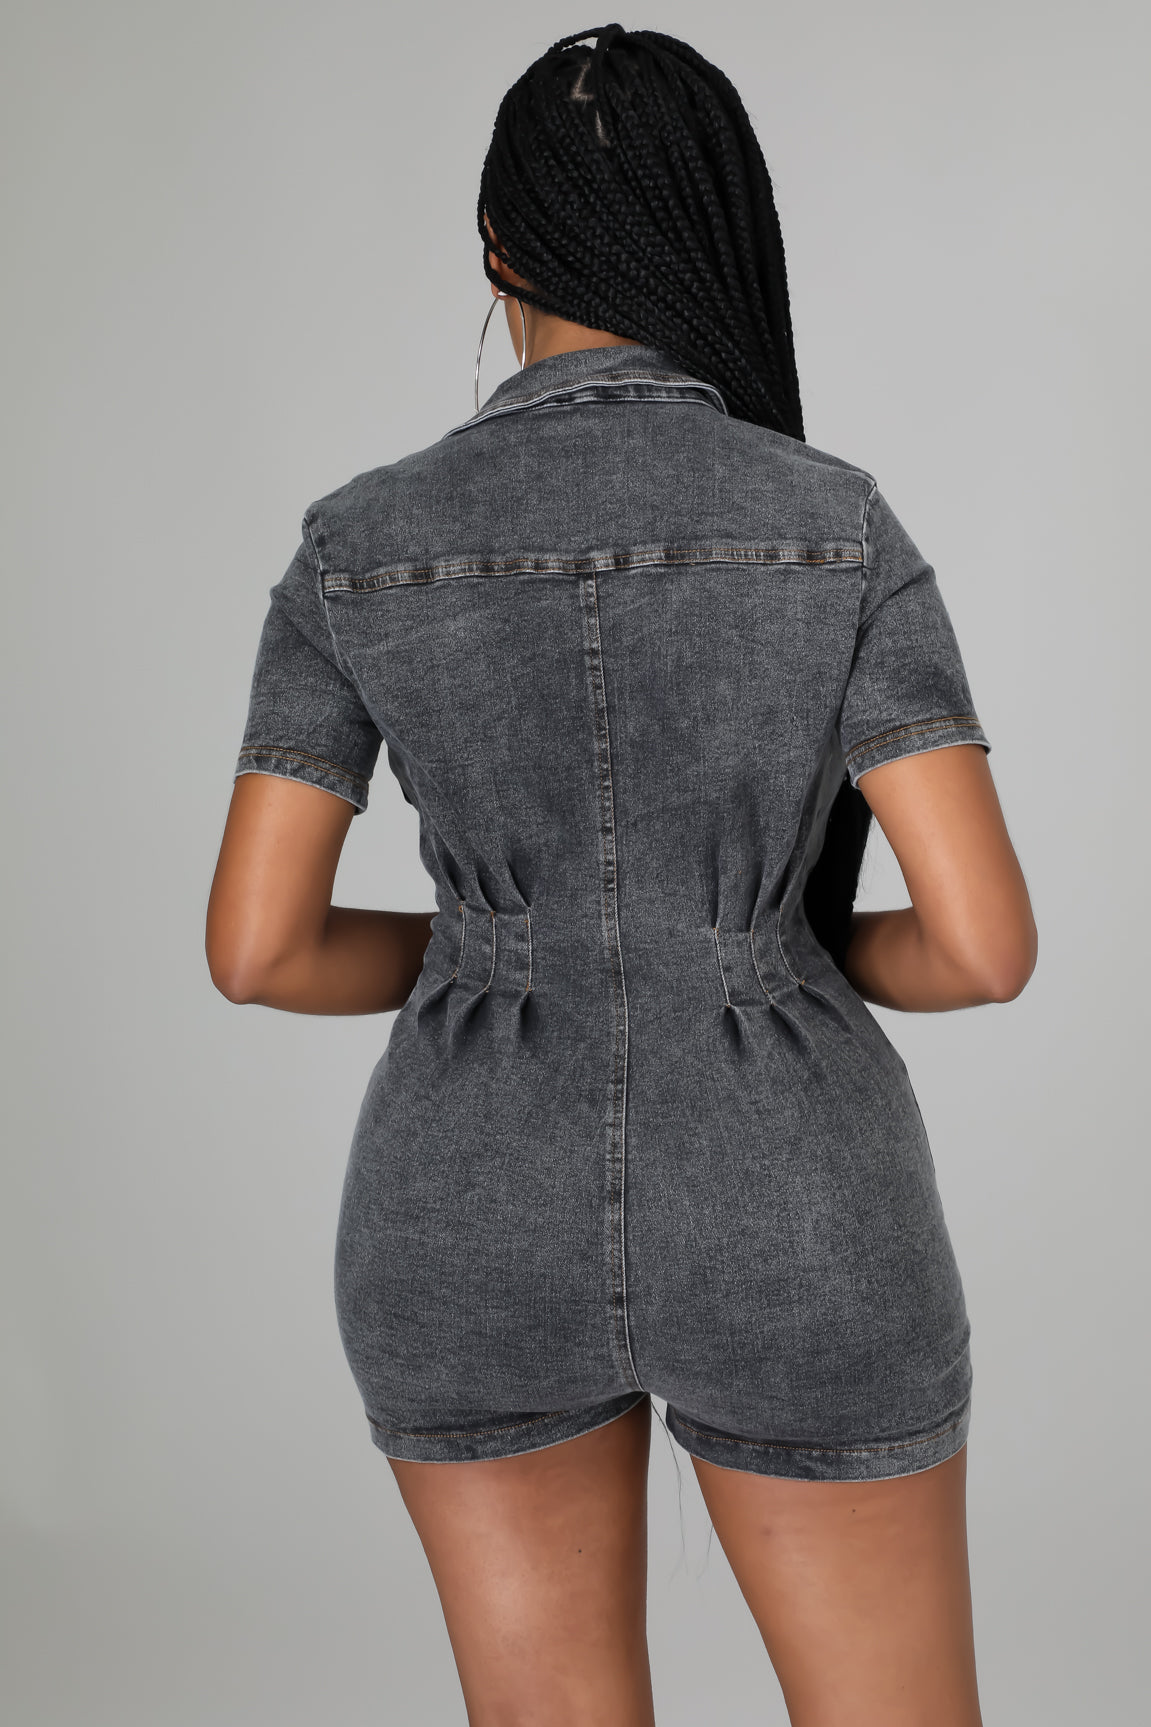 At First Glance Romper